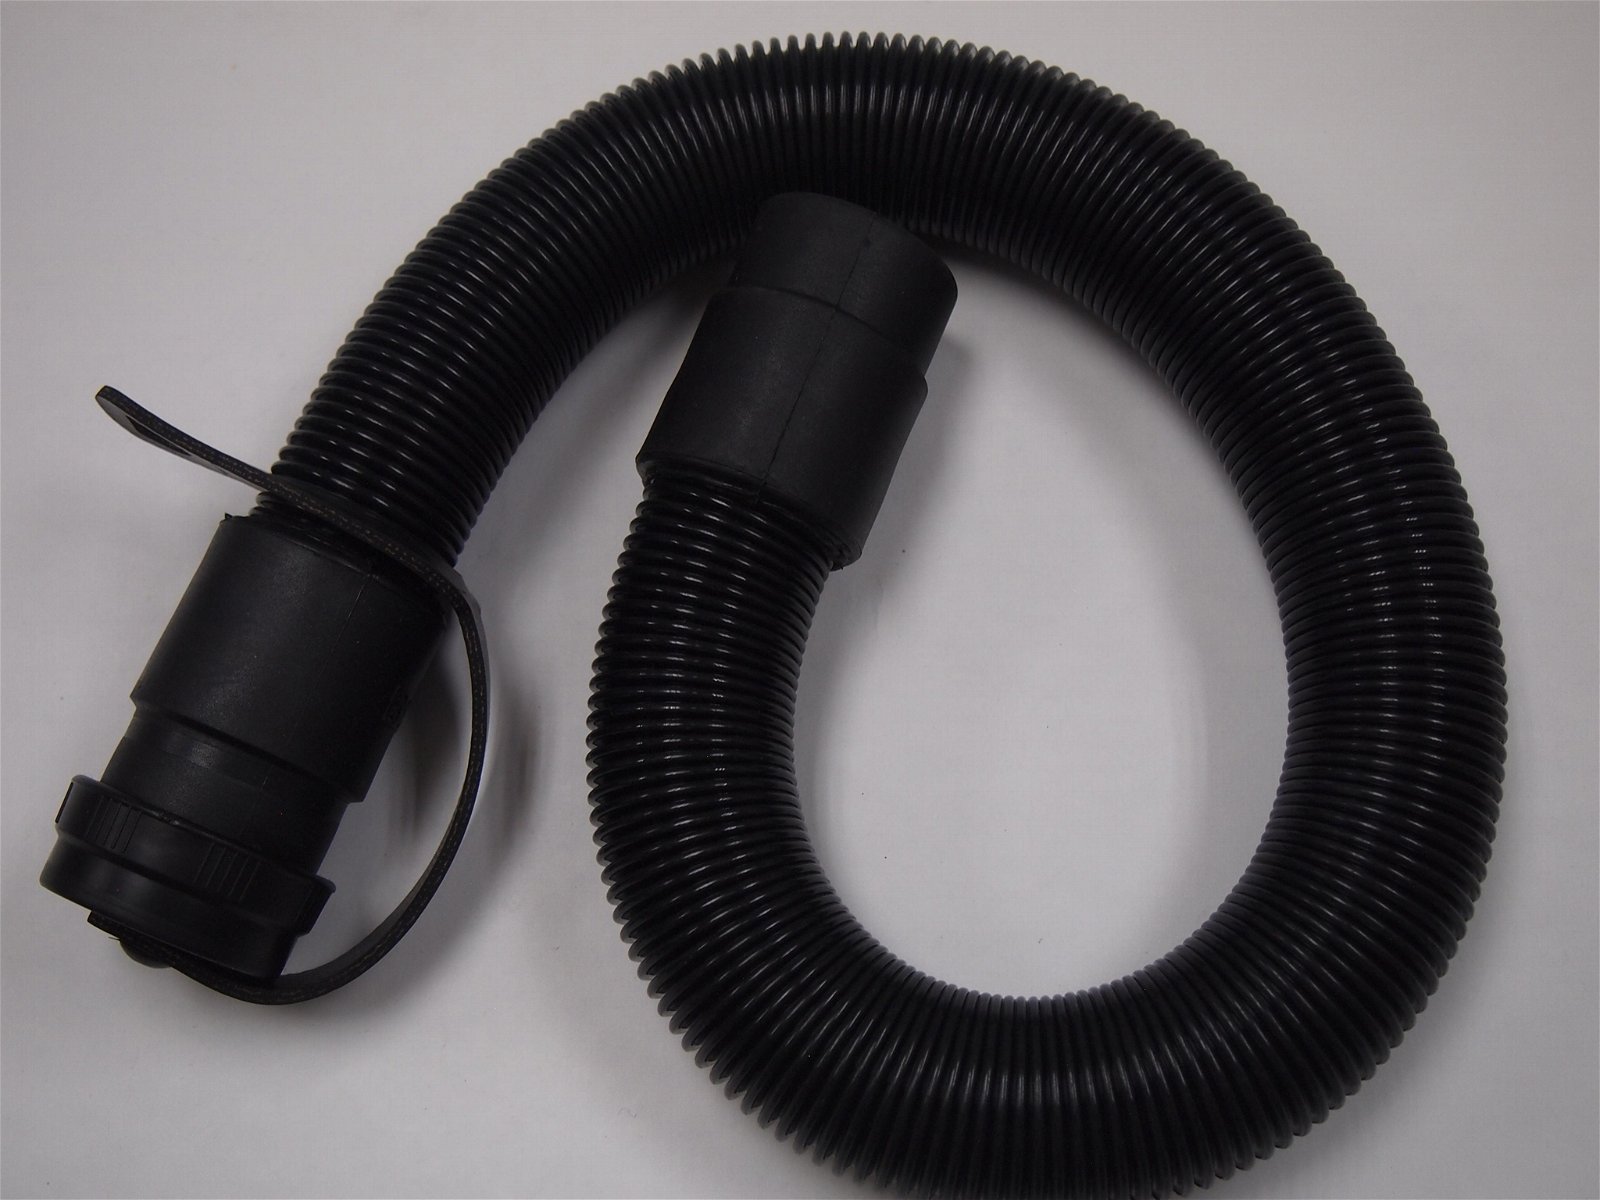 Stretch Wire Reinforced Hoses/vacuum cleaner hose 3